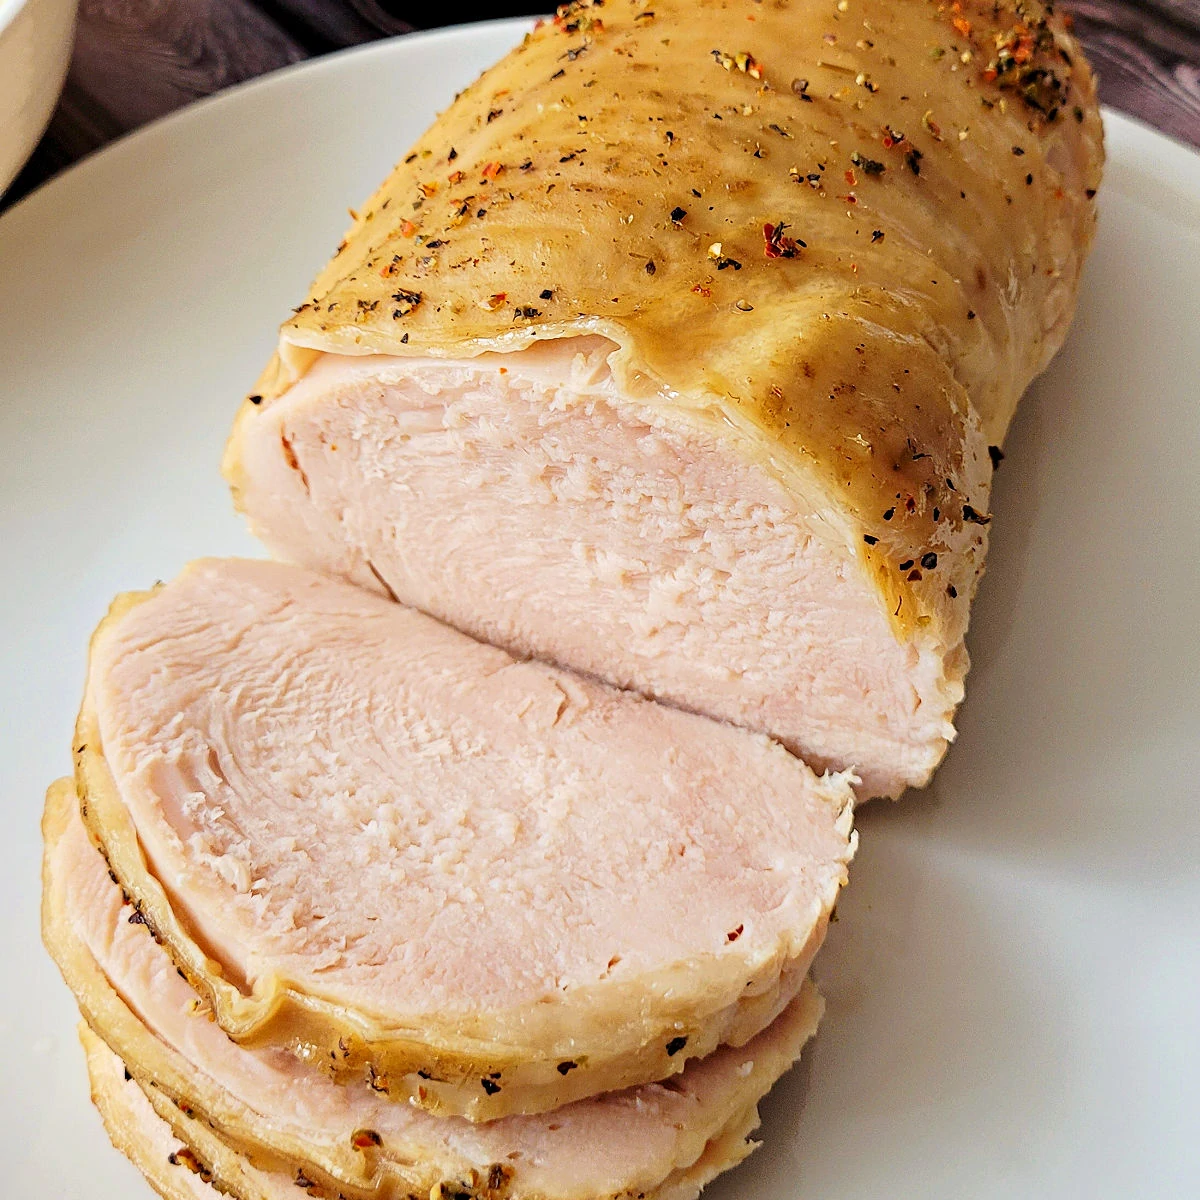 Slow cooker turkey breast sliced and served on a white plate.